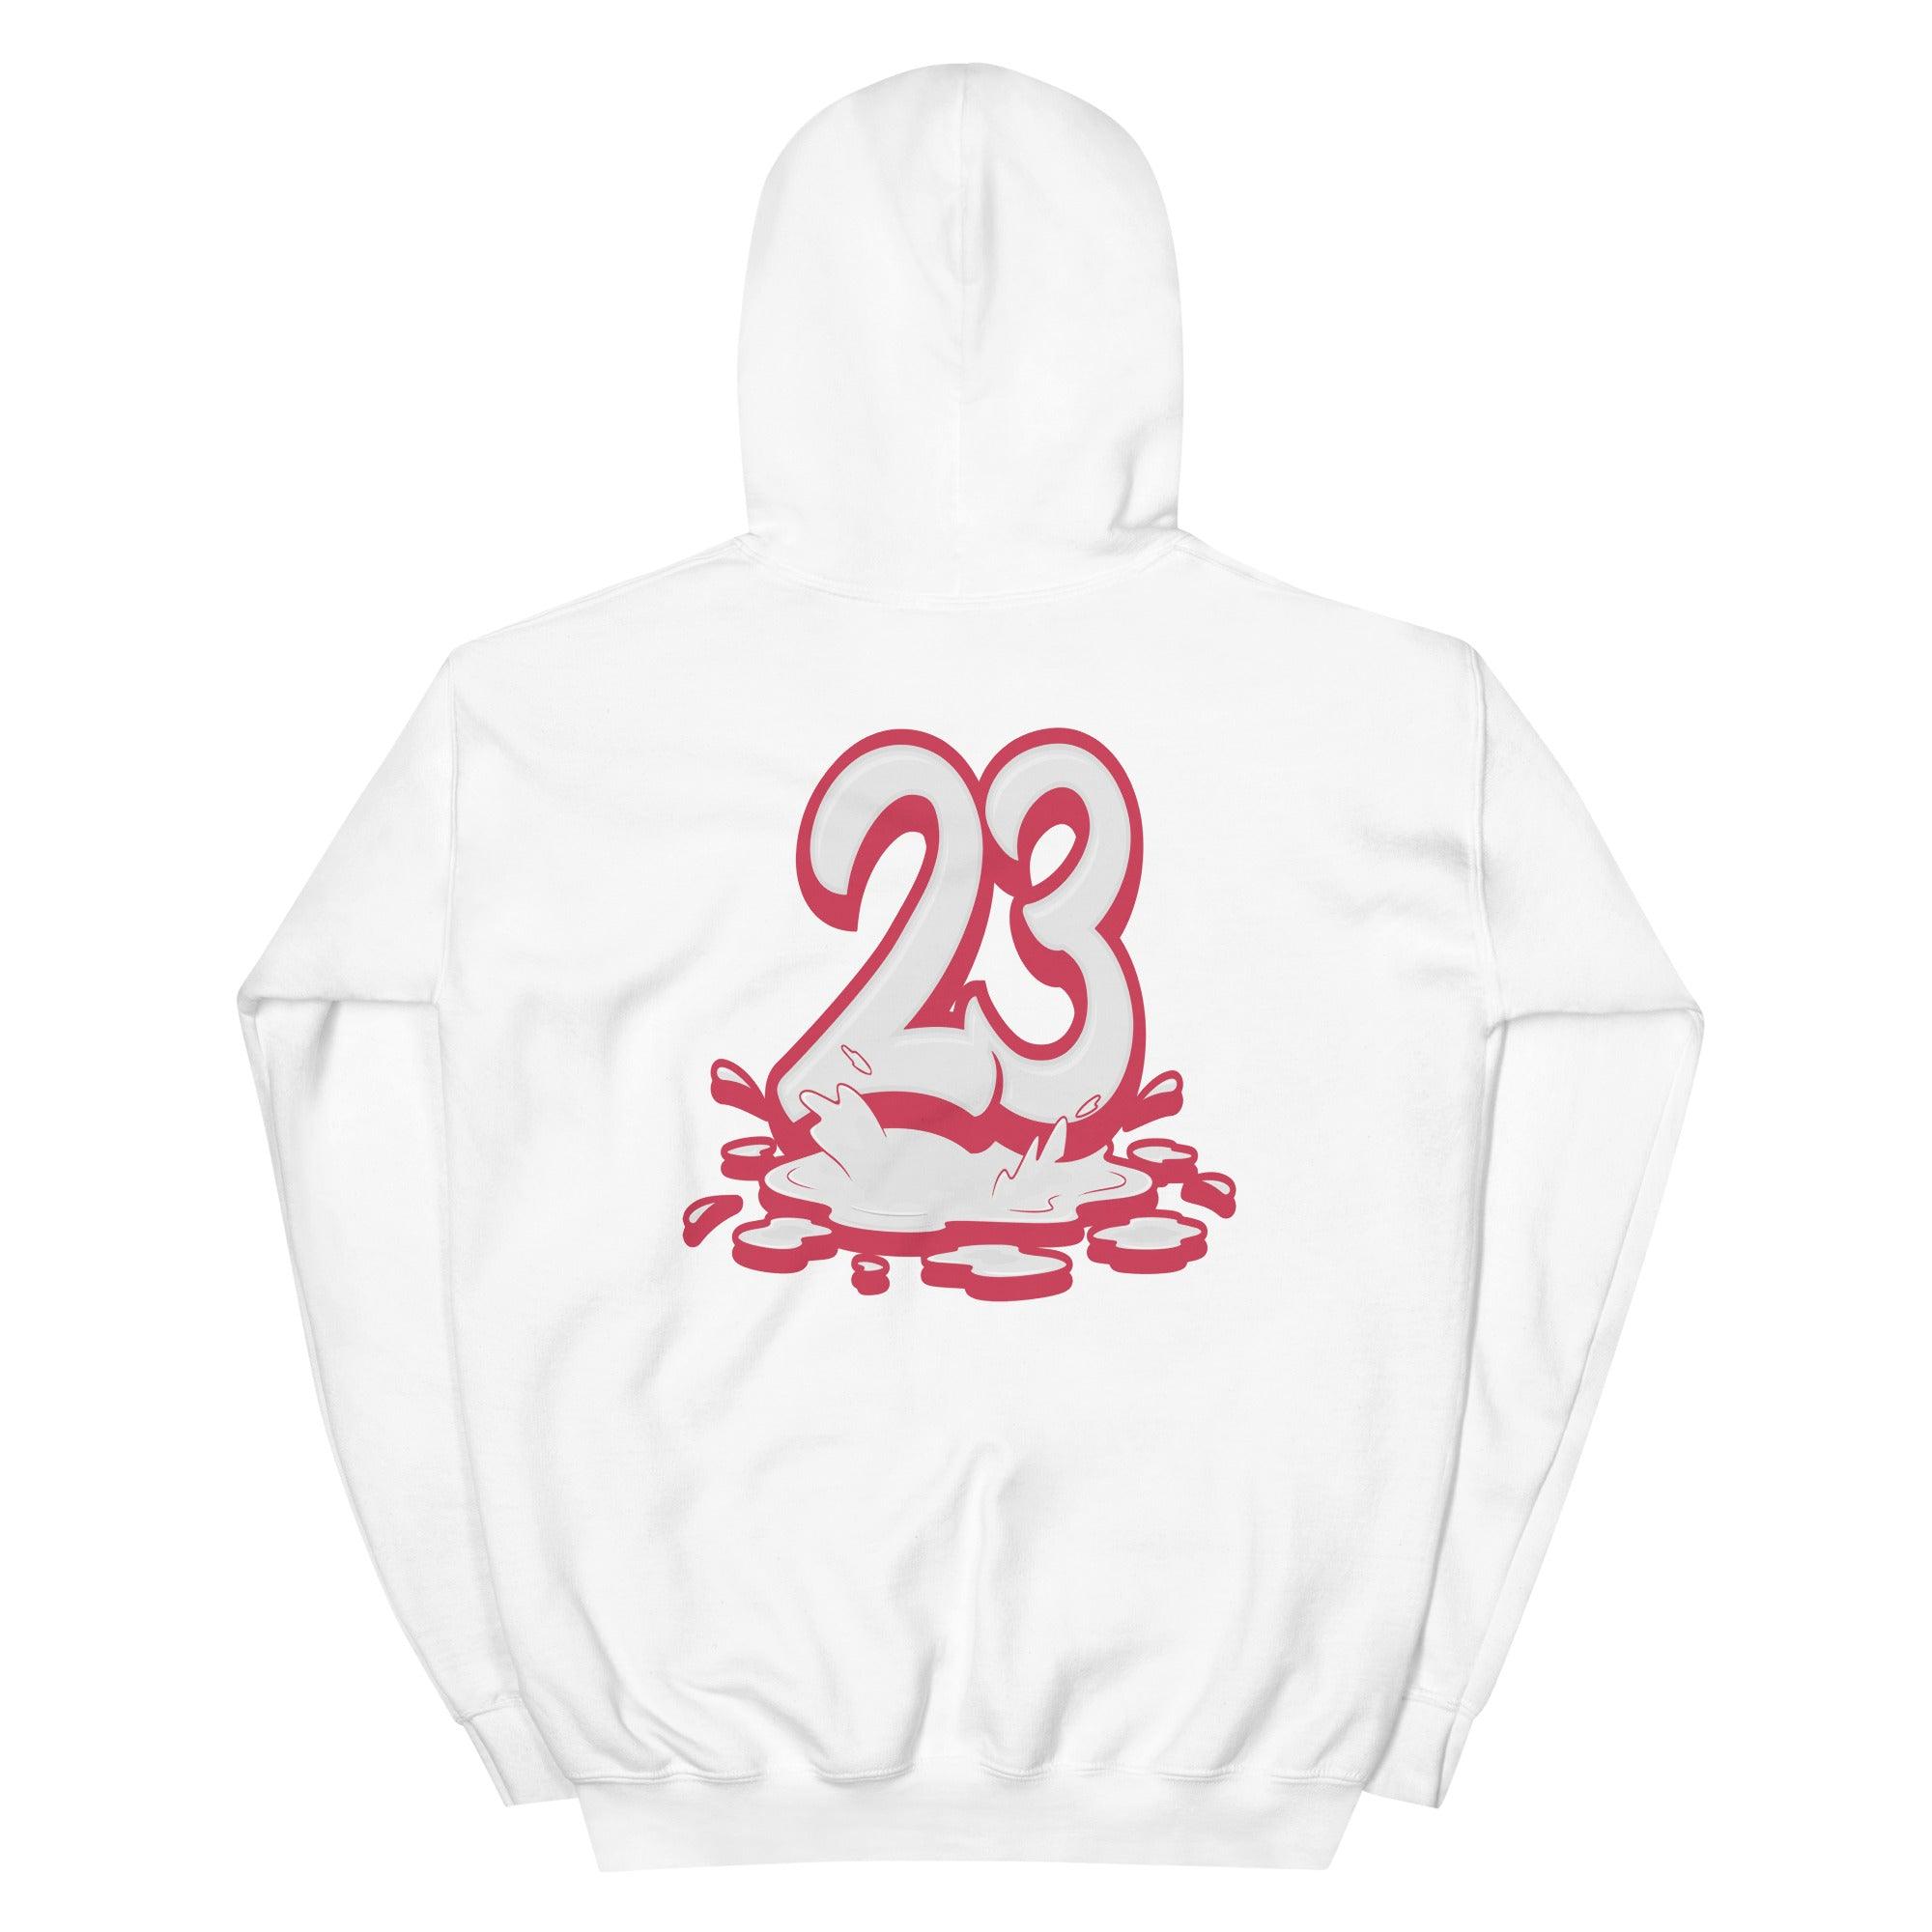 Number 23 Melting Hoodie Nike Dunk High Championship White Red photo